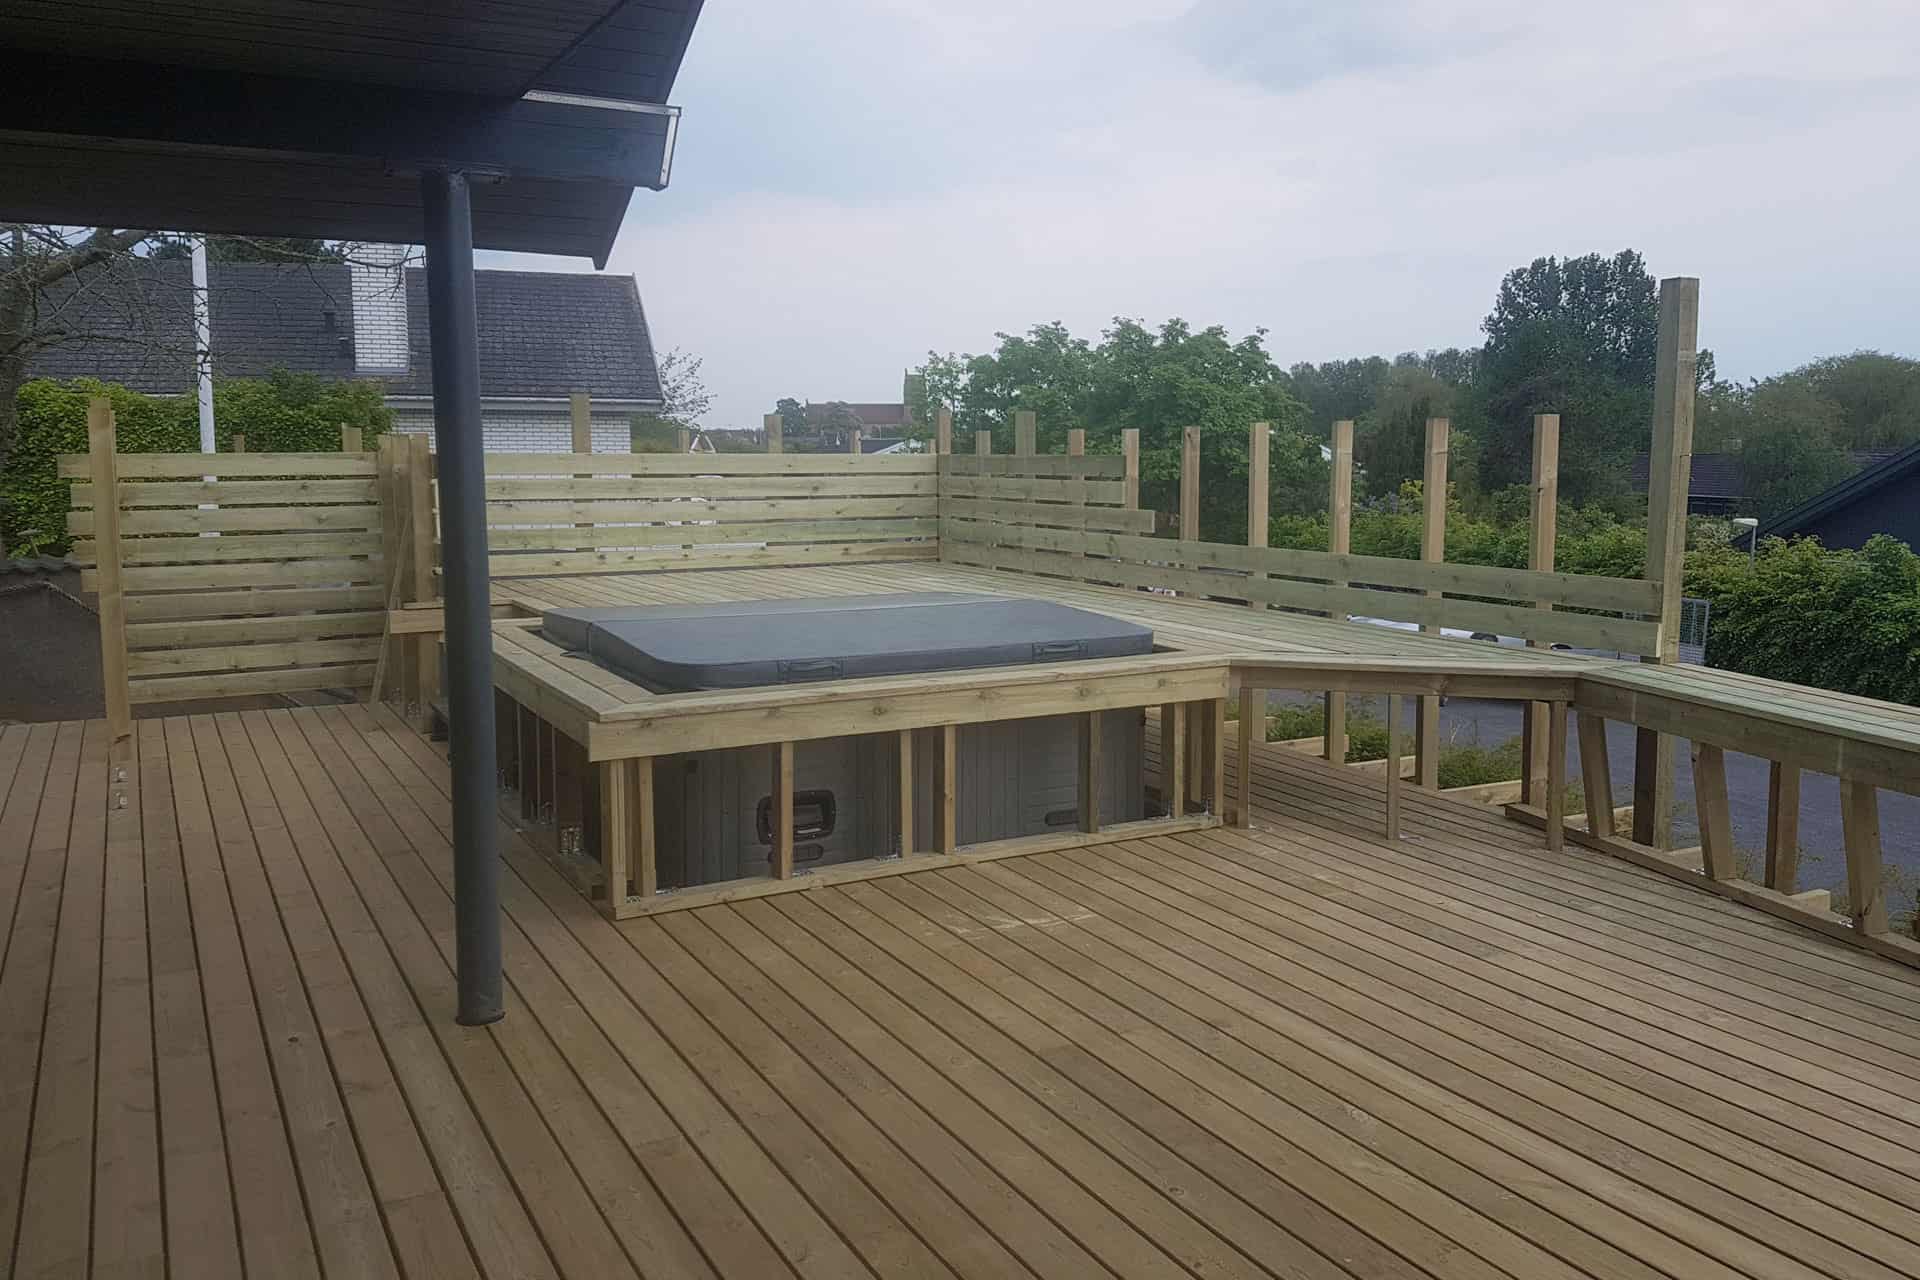 How to build a deck with lowered spa